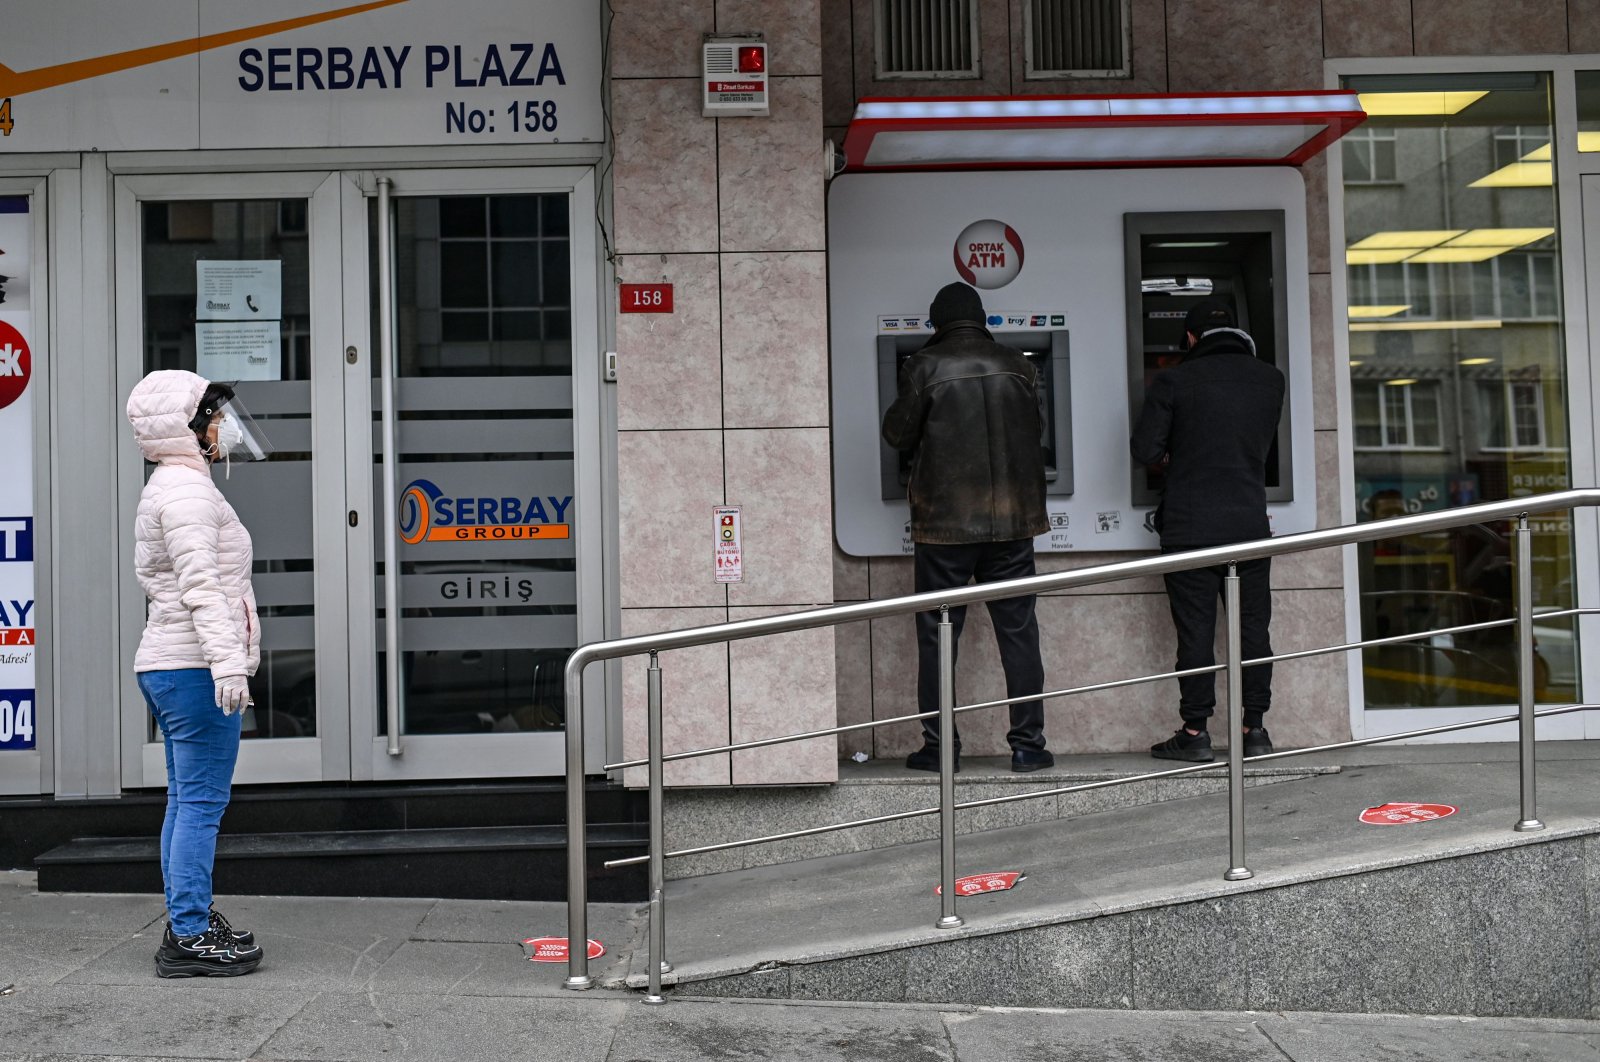 People queue to use ATM machines while observing social distancing rules outside a bank in Istanbul, Turkey, April 21, 2020. (AP Photo)